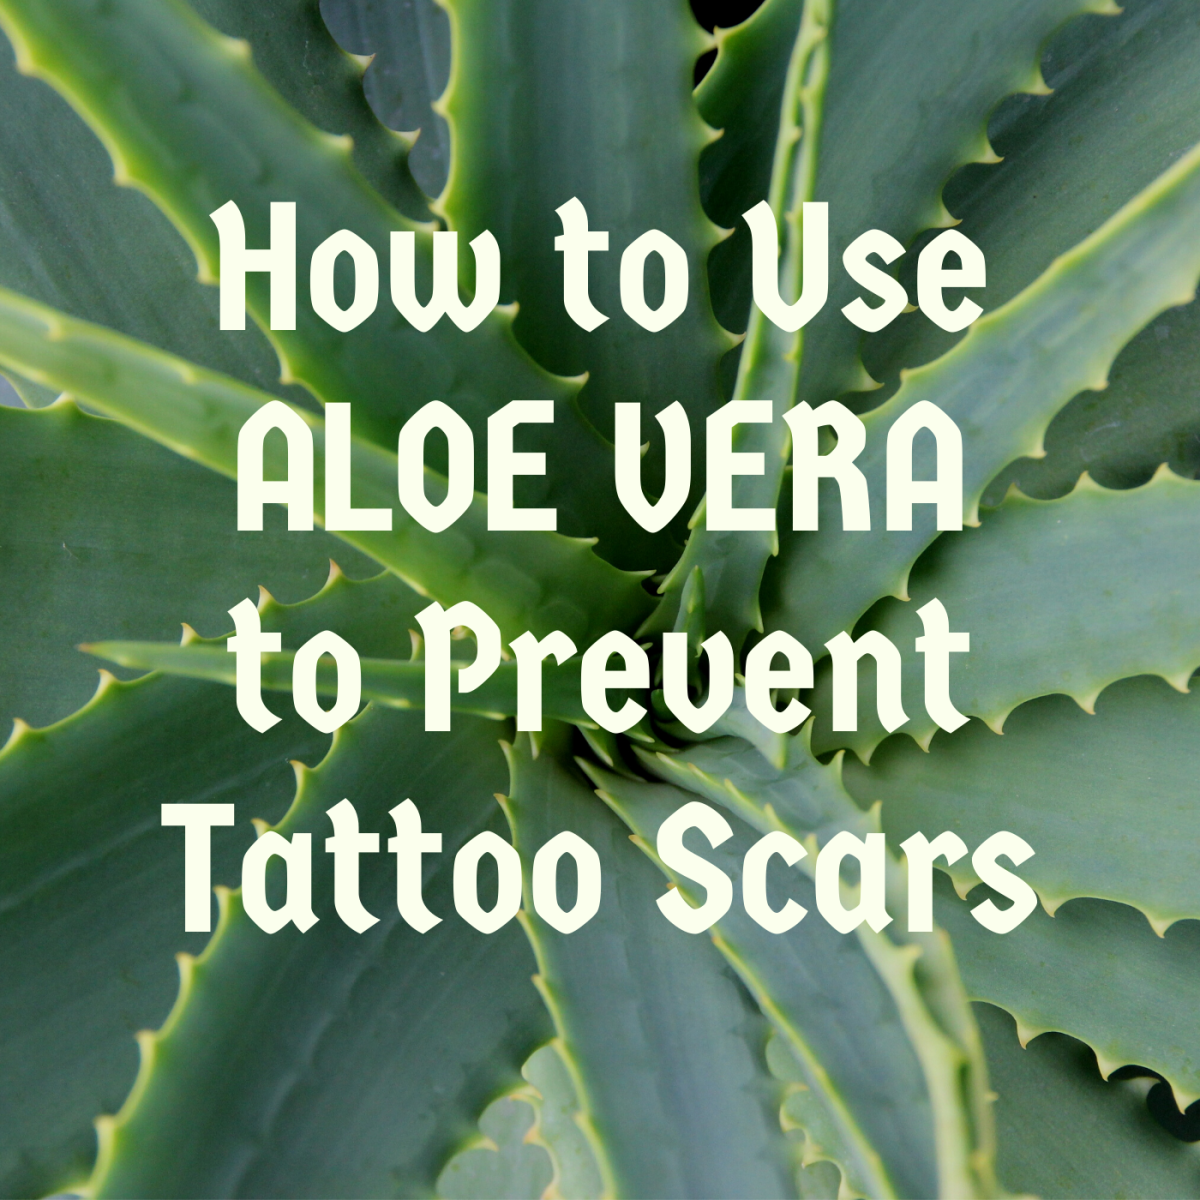 Is it safe to use aloe vera to treat tattoo scarring?